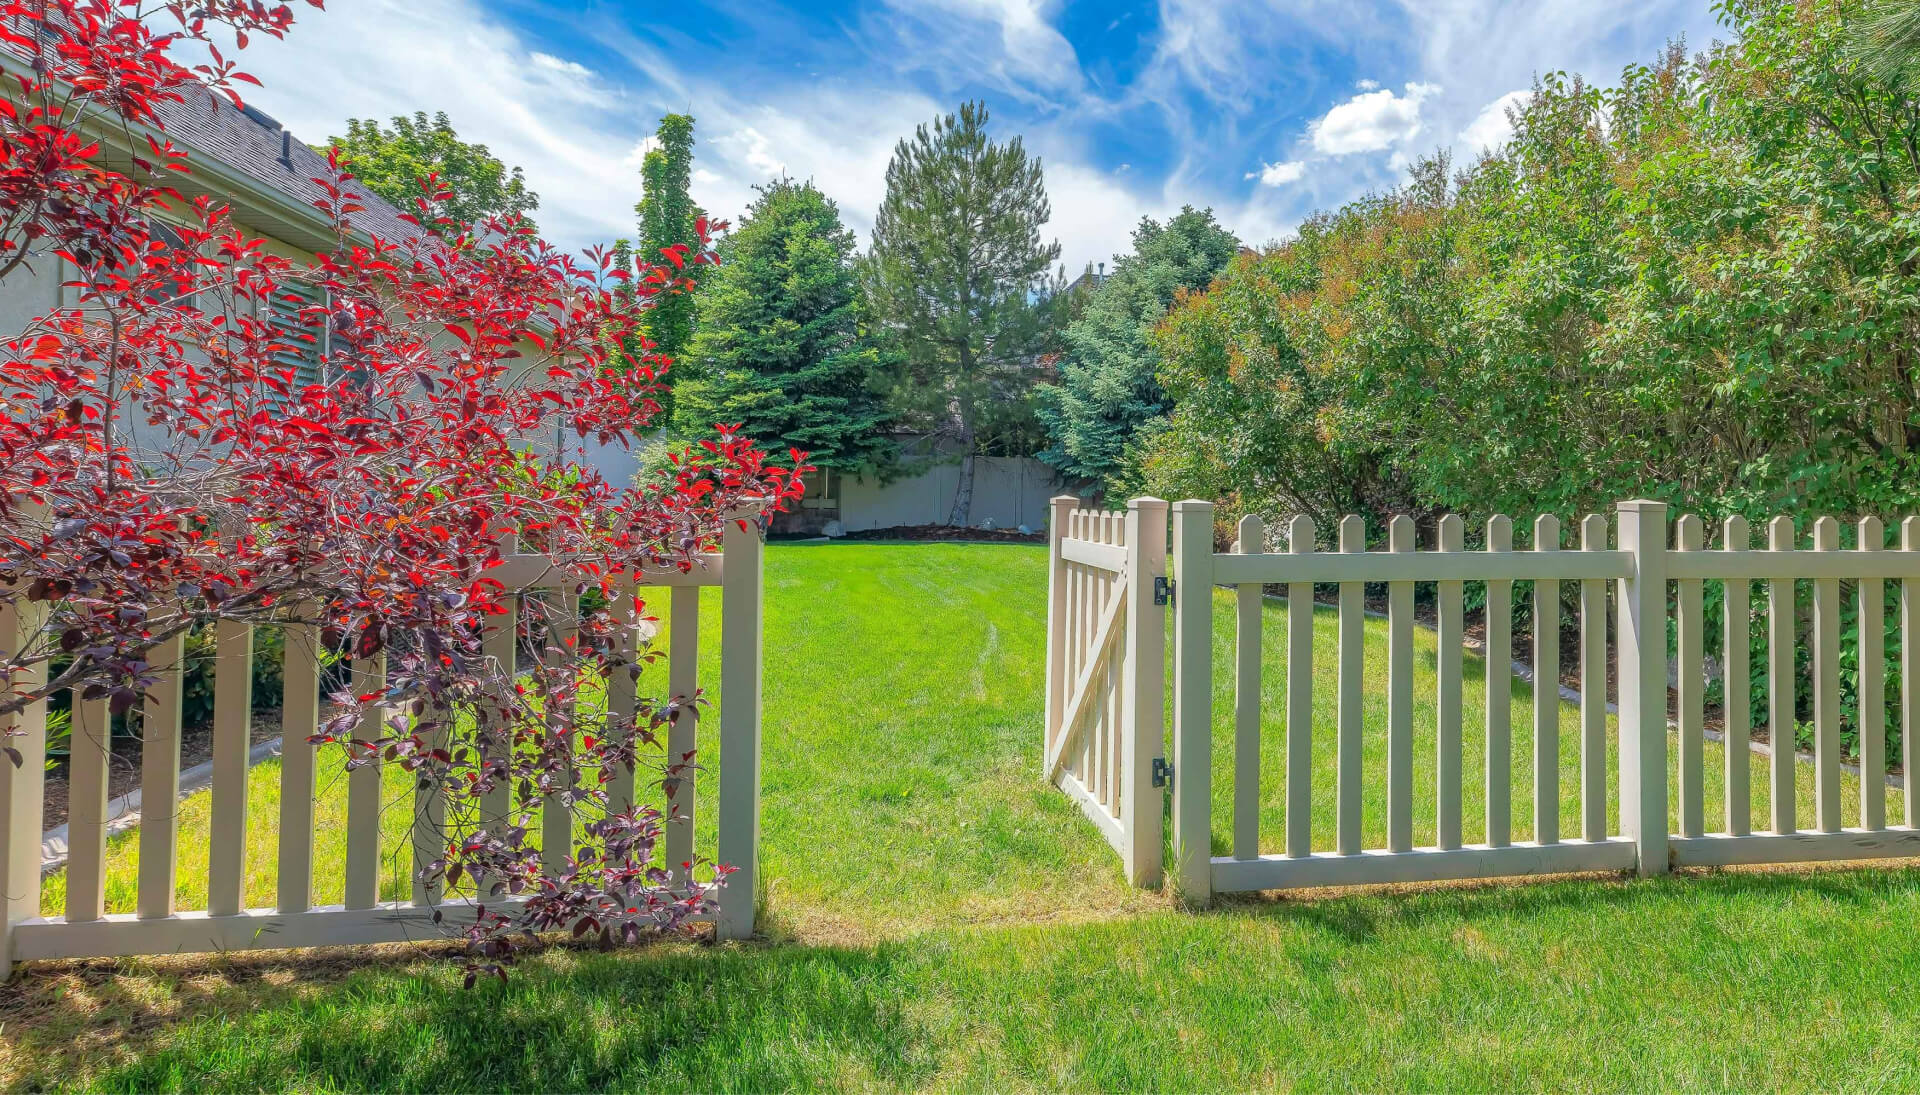 A functional fence gate providing access to a well-maintained backyard, surrounded by a wooden fence in Beaumont